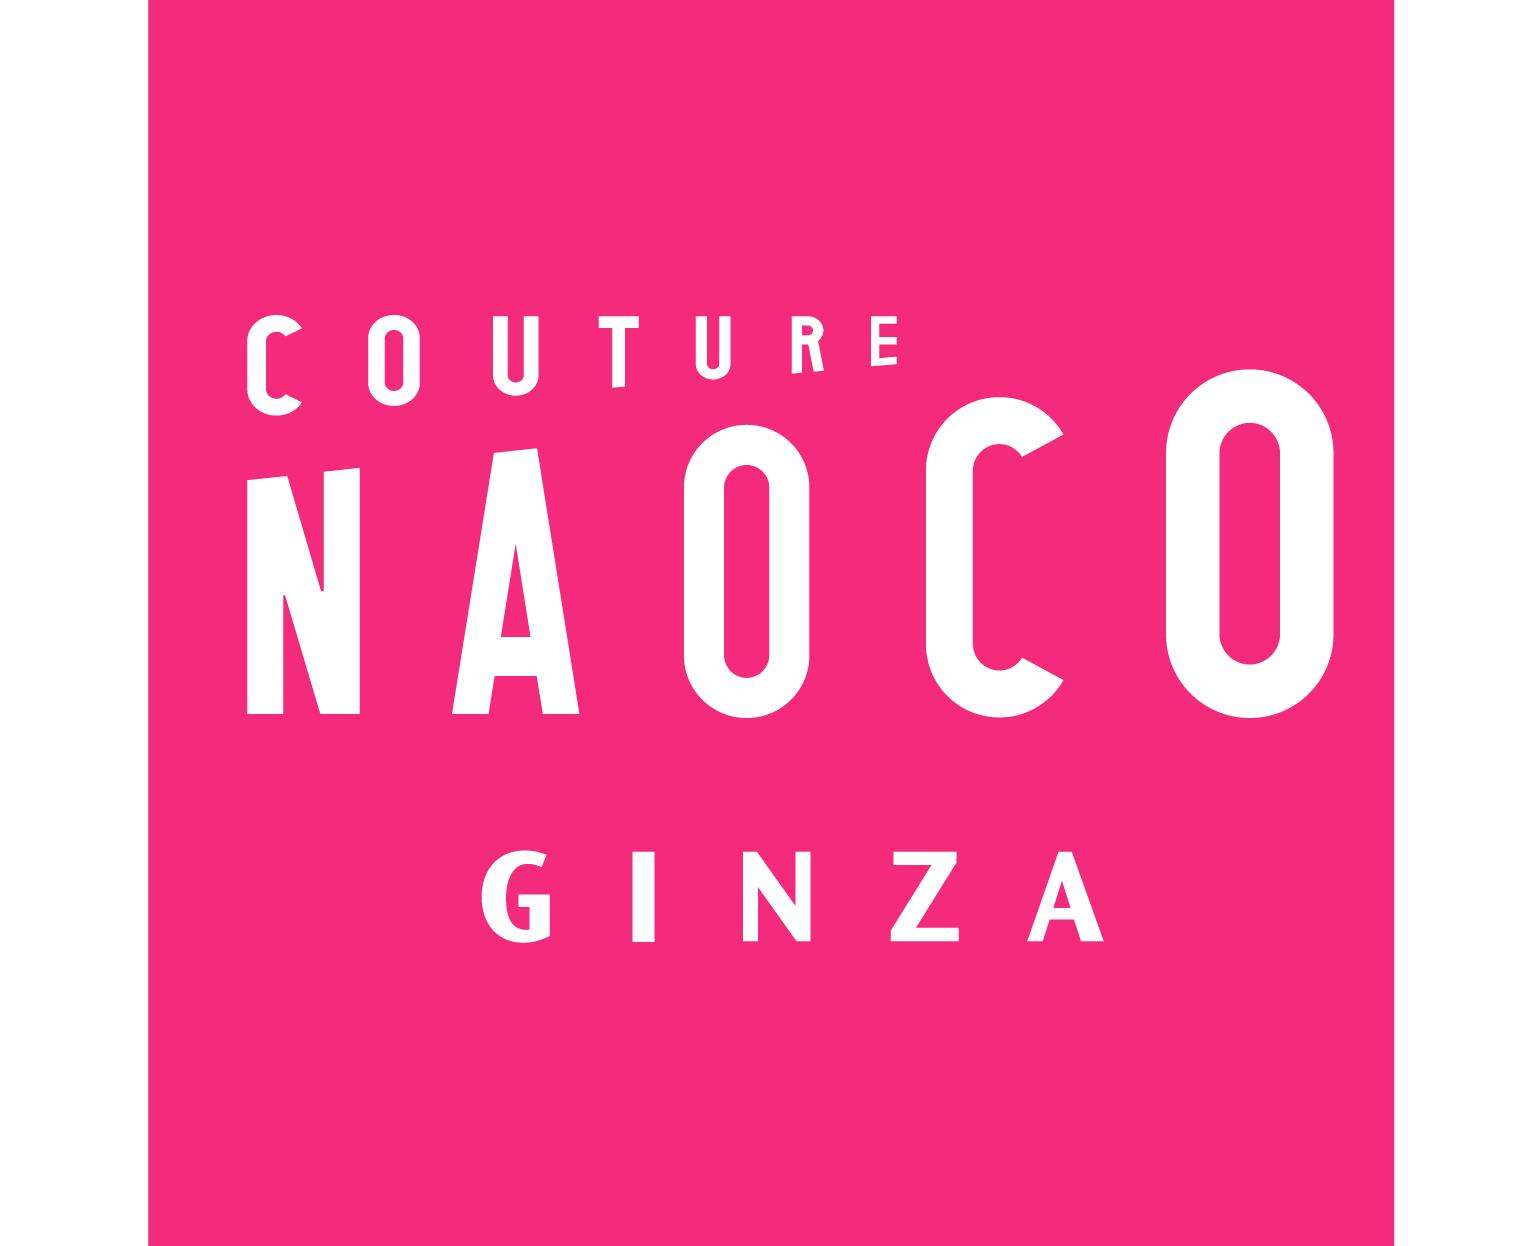 Couture Naoco - Crunchbase Company Profile & Funding